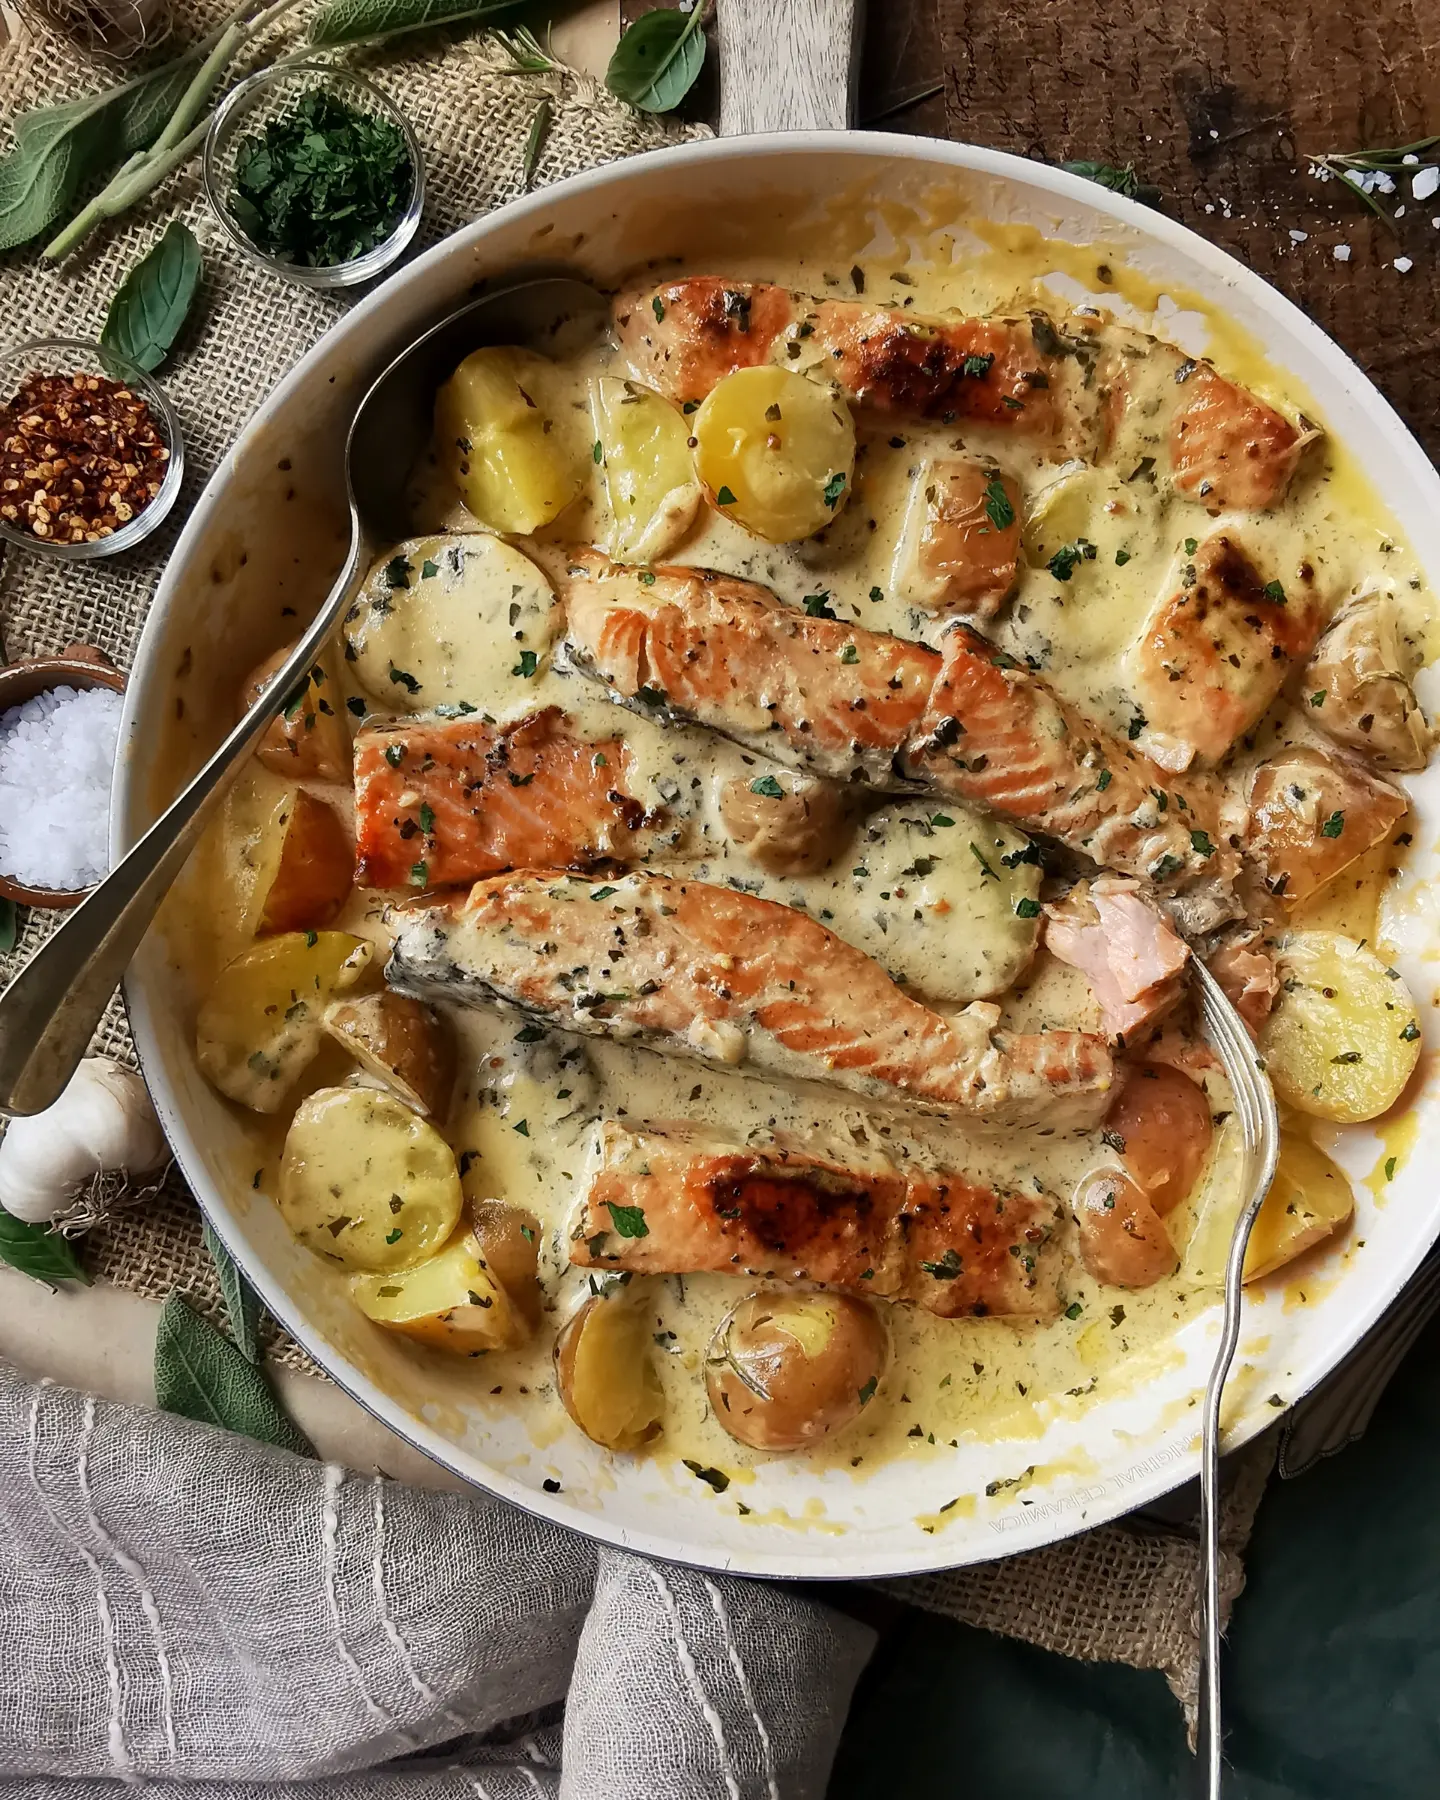 Salmon with herbs and cream sauce